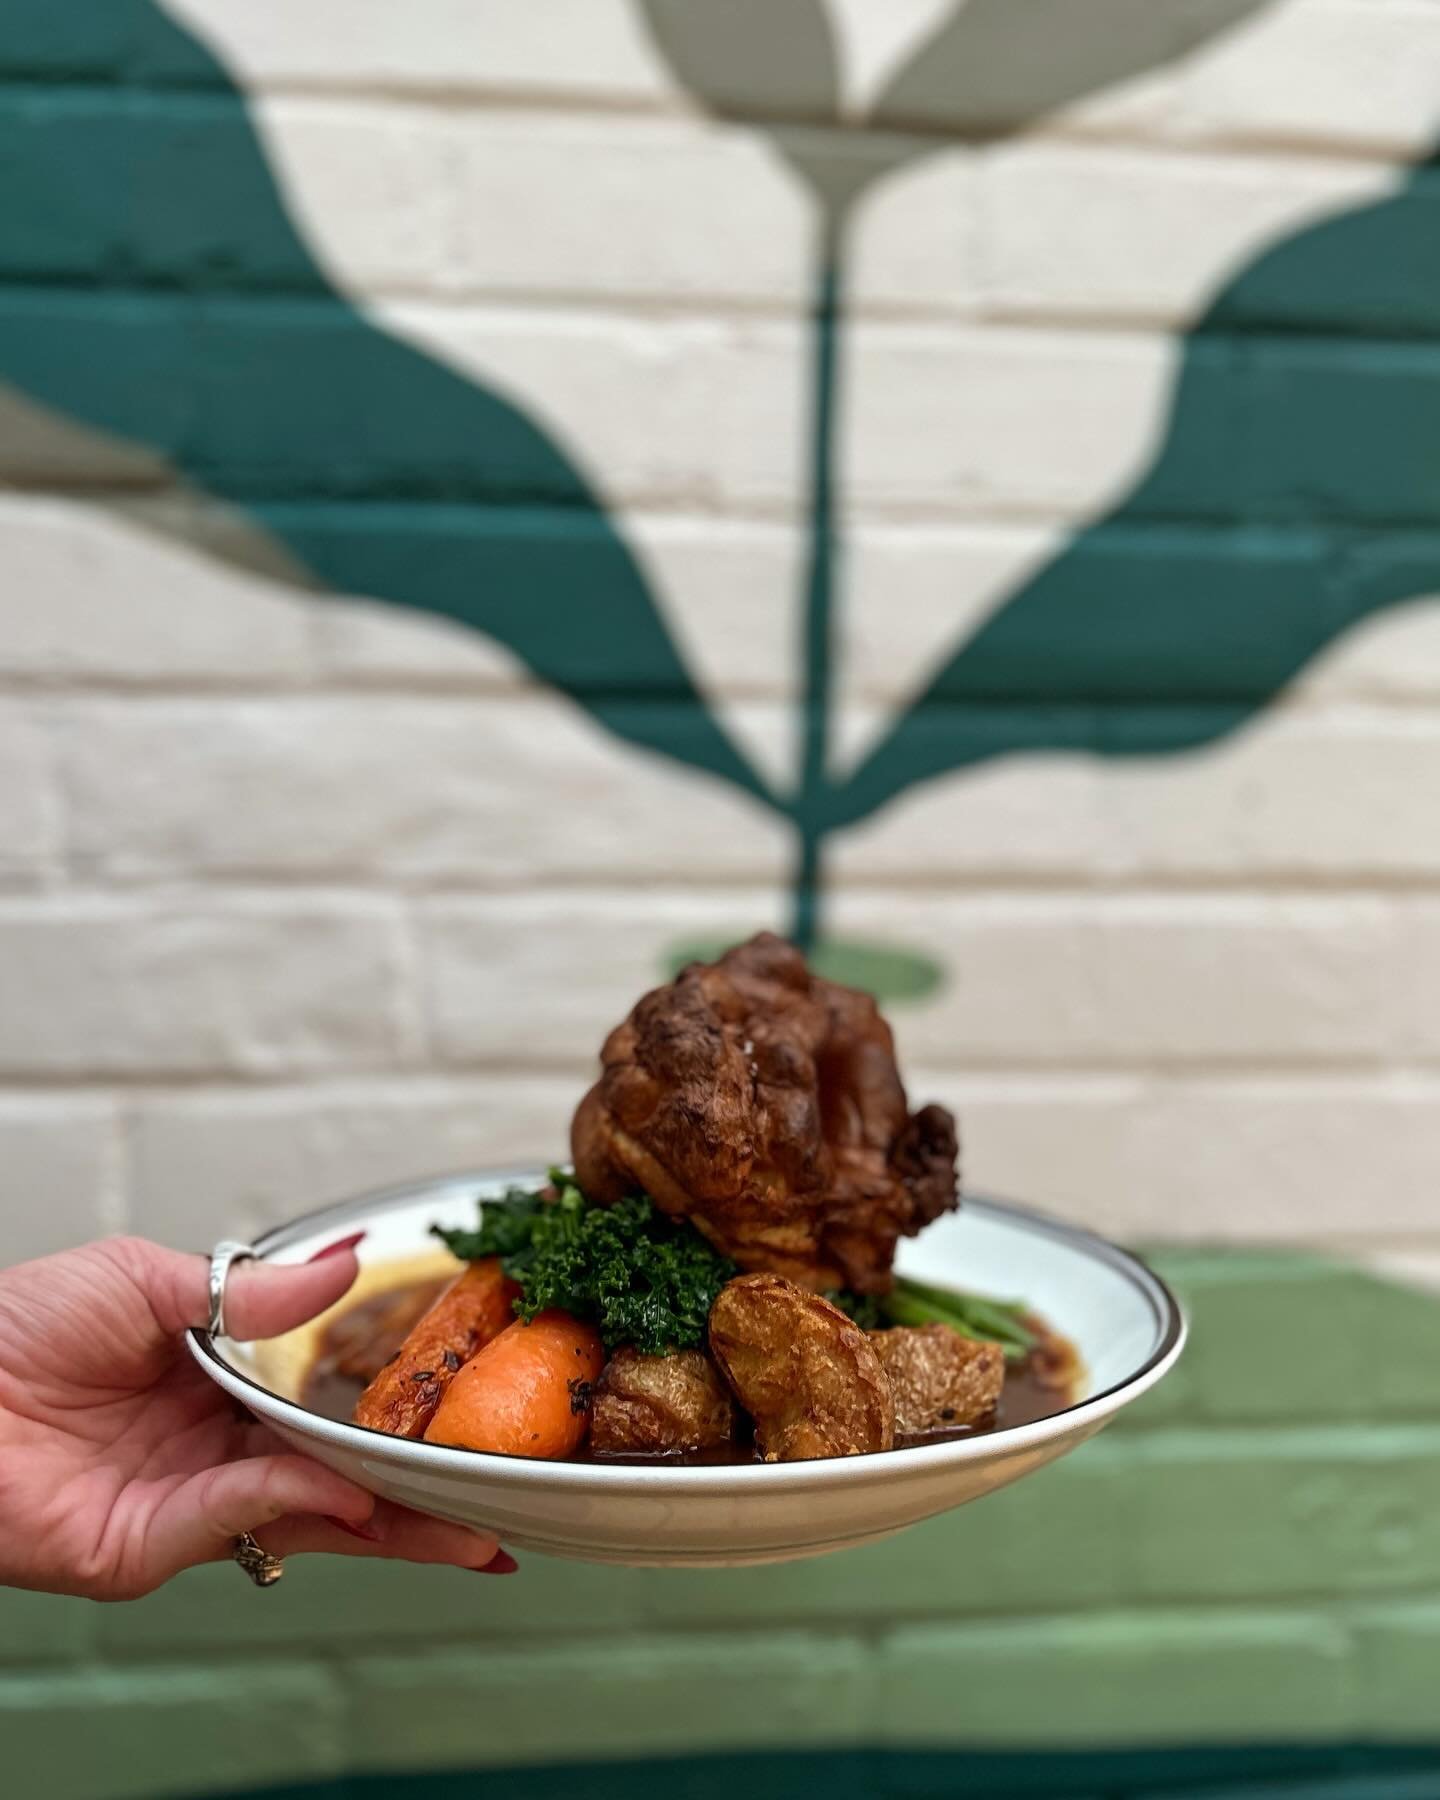 Still some limited space left for Mothers Day walk ins! This could be your pork roast tomorrow 🤤

Open from 12pm tomorrow. We promise not to tell her you left it late 😉